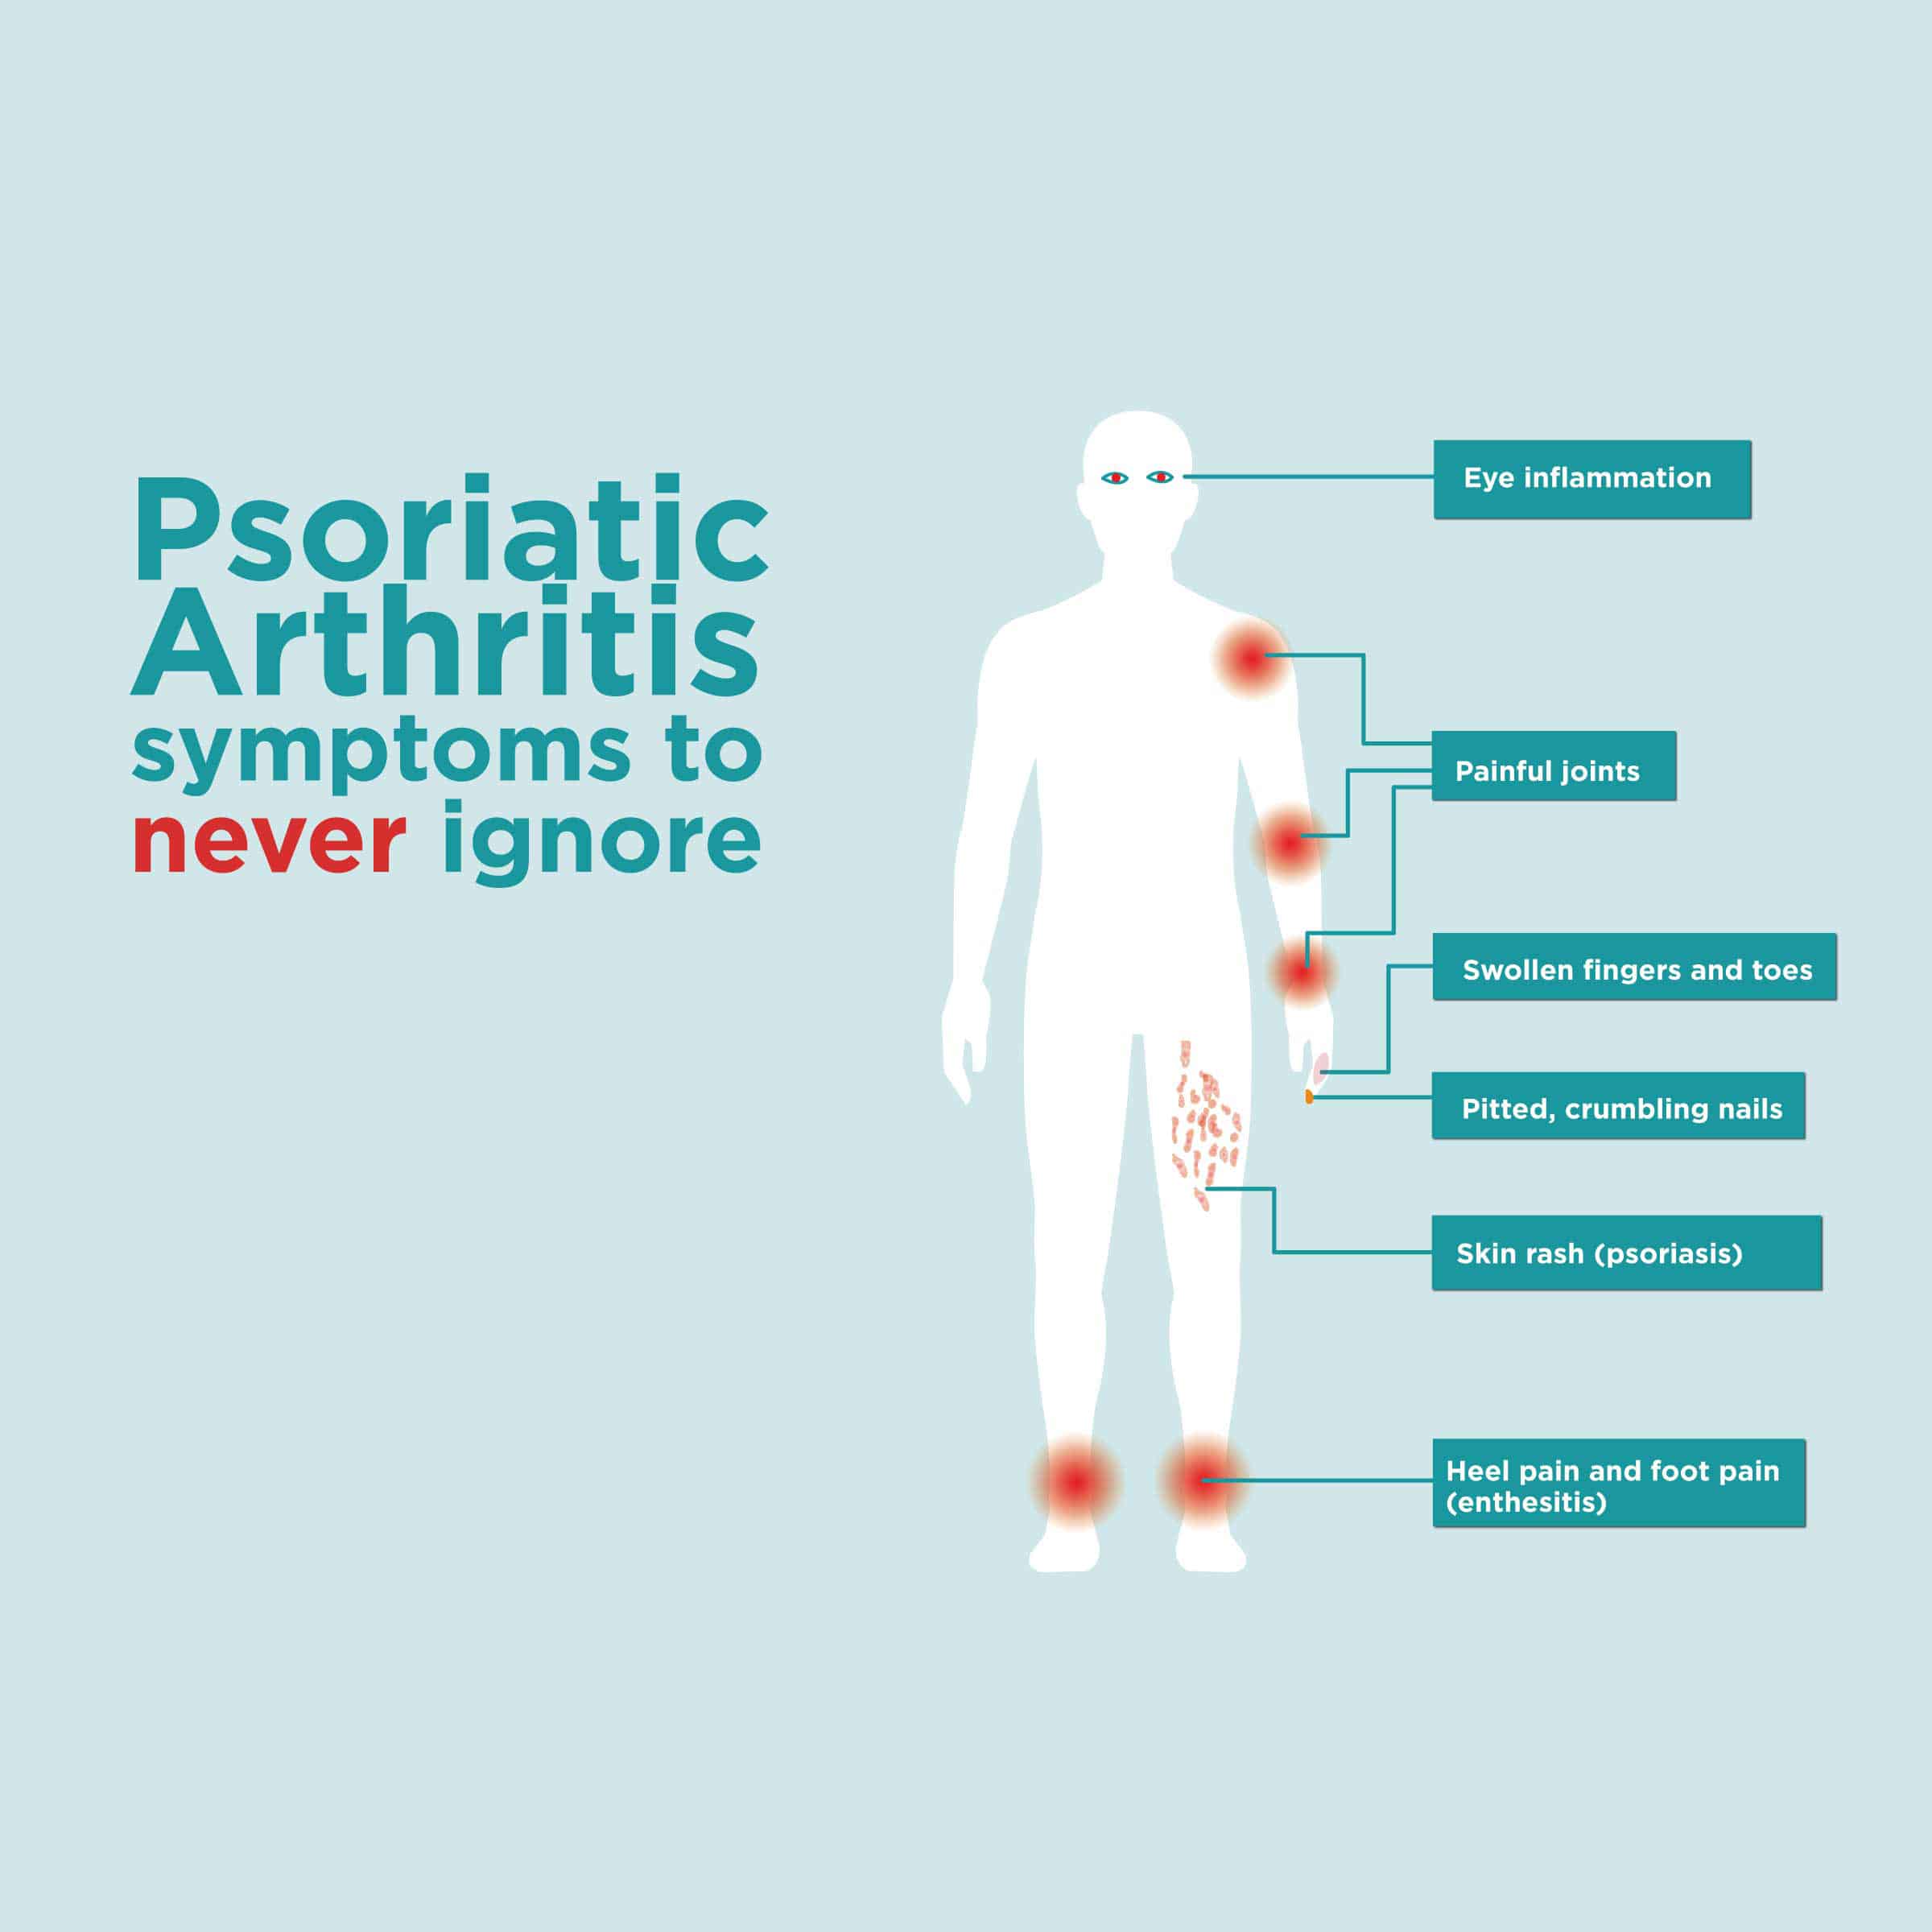 Learning About Psoriatic Arthritis (PsA)